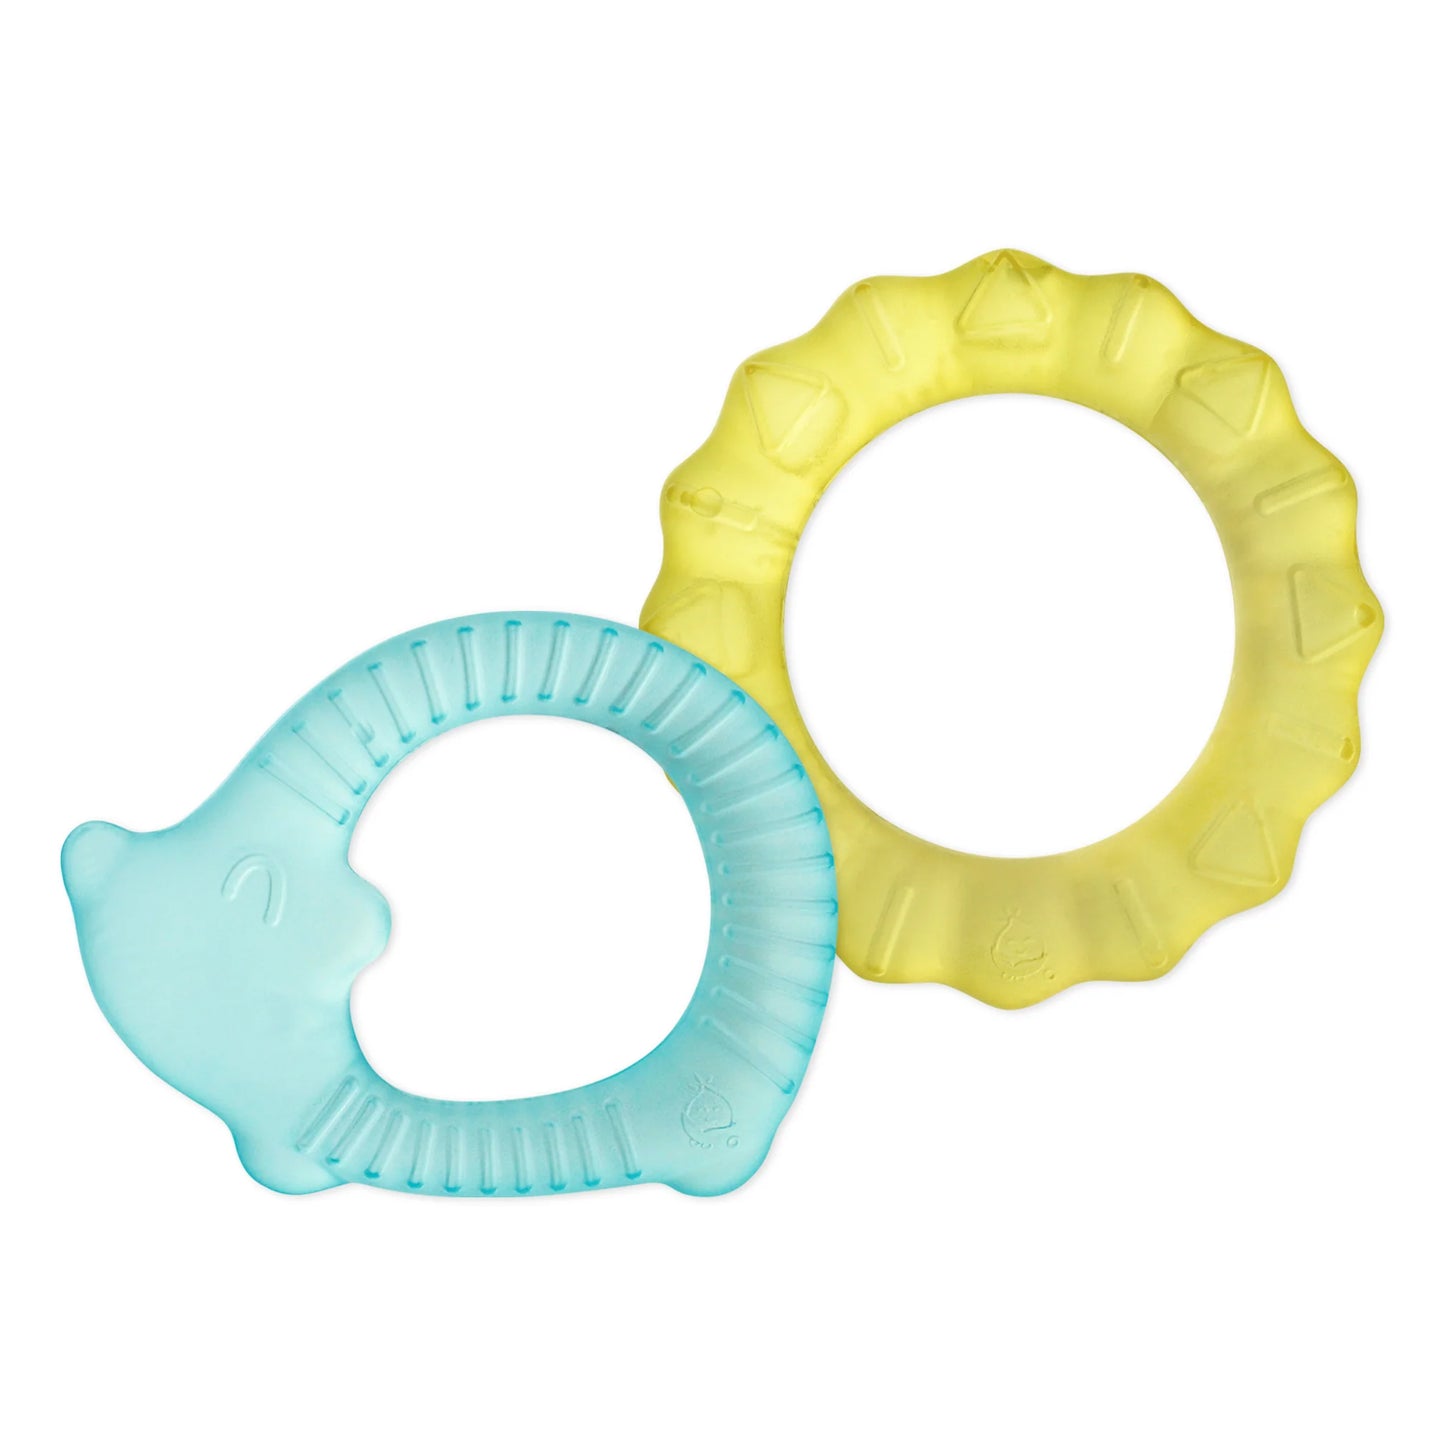 Cool Nature Teethers (2 pack) Yellow/Teal Set 3mo+